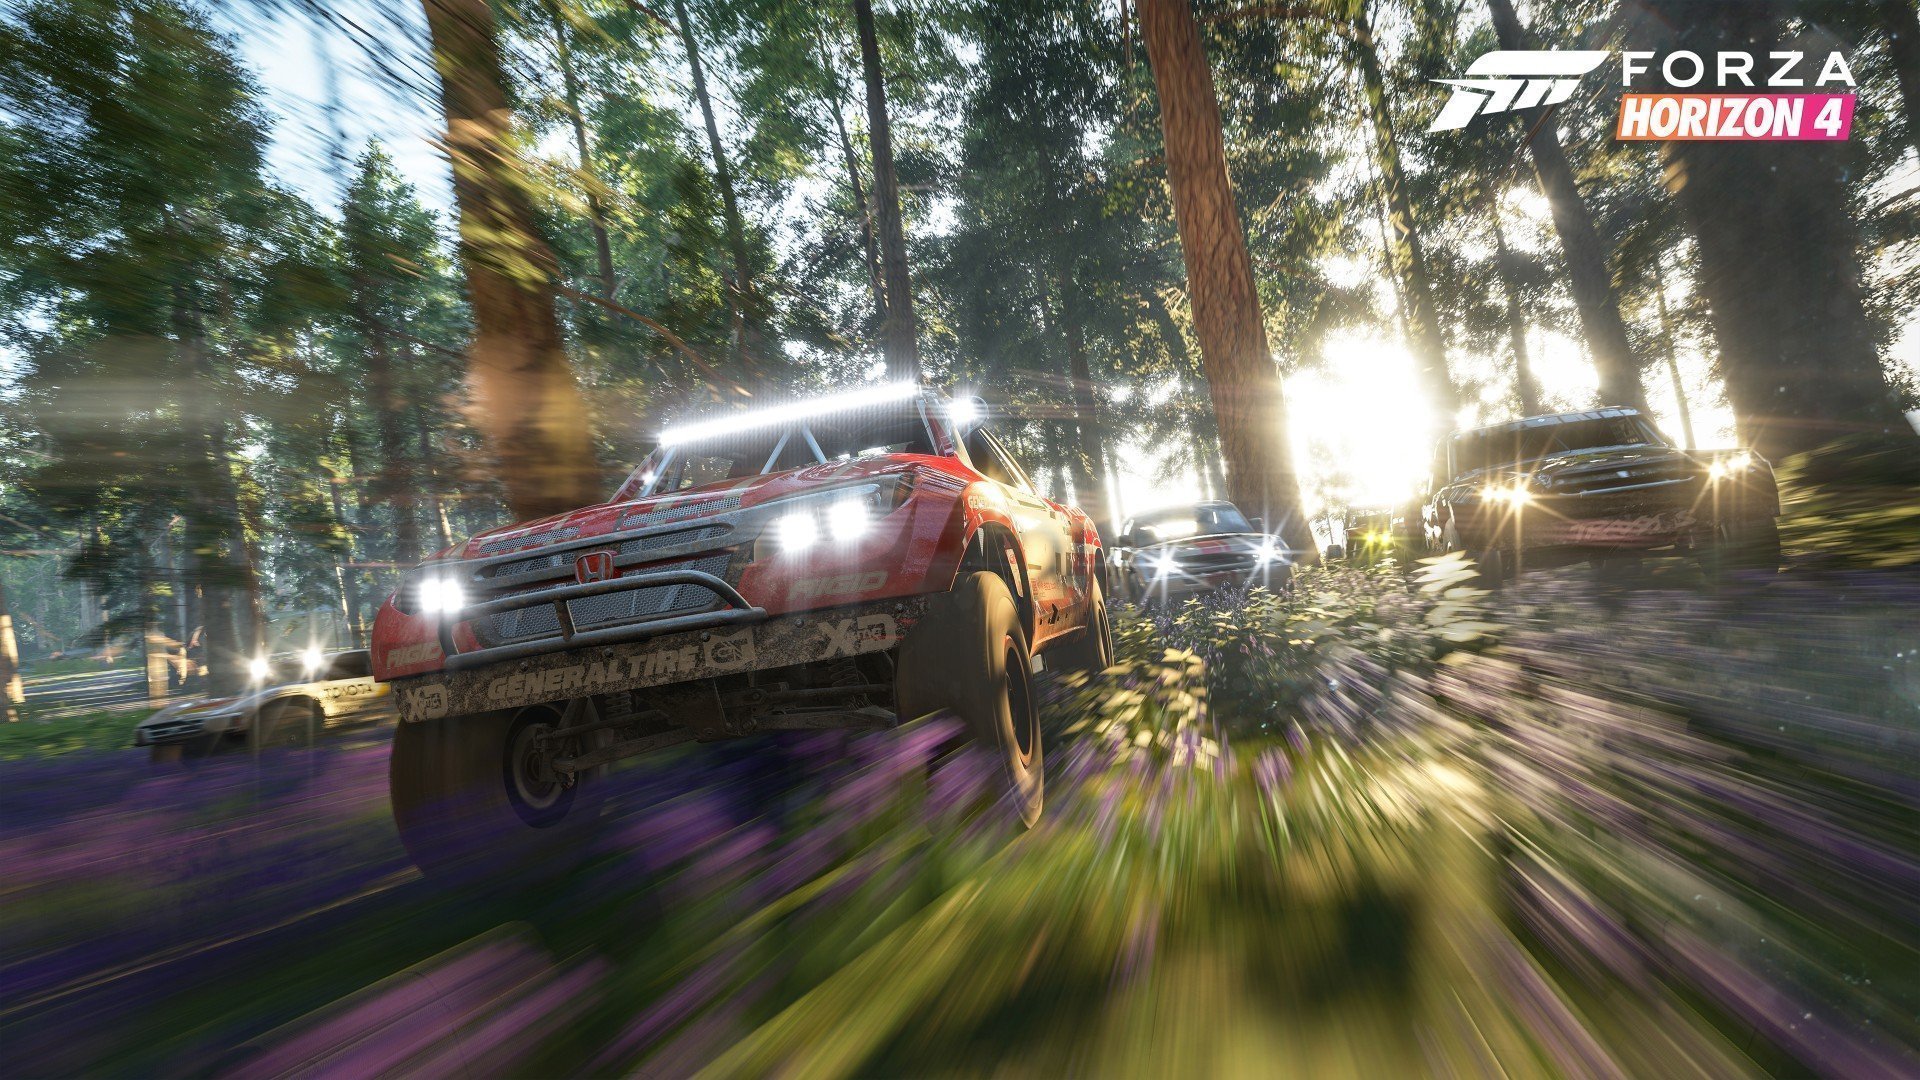 Forza Horizon 4 Demo is now available for free on Windows 10 and Xbox One Forza-Horizon-4_Forest-Trucks-1.jpg